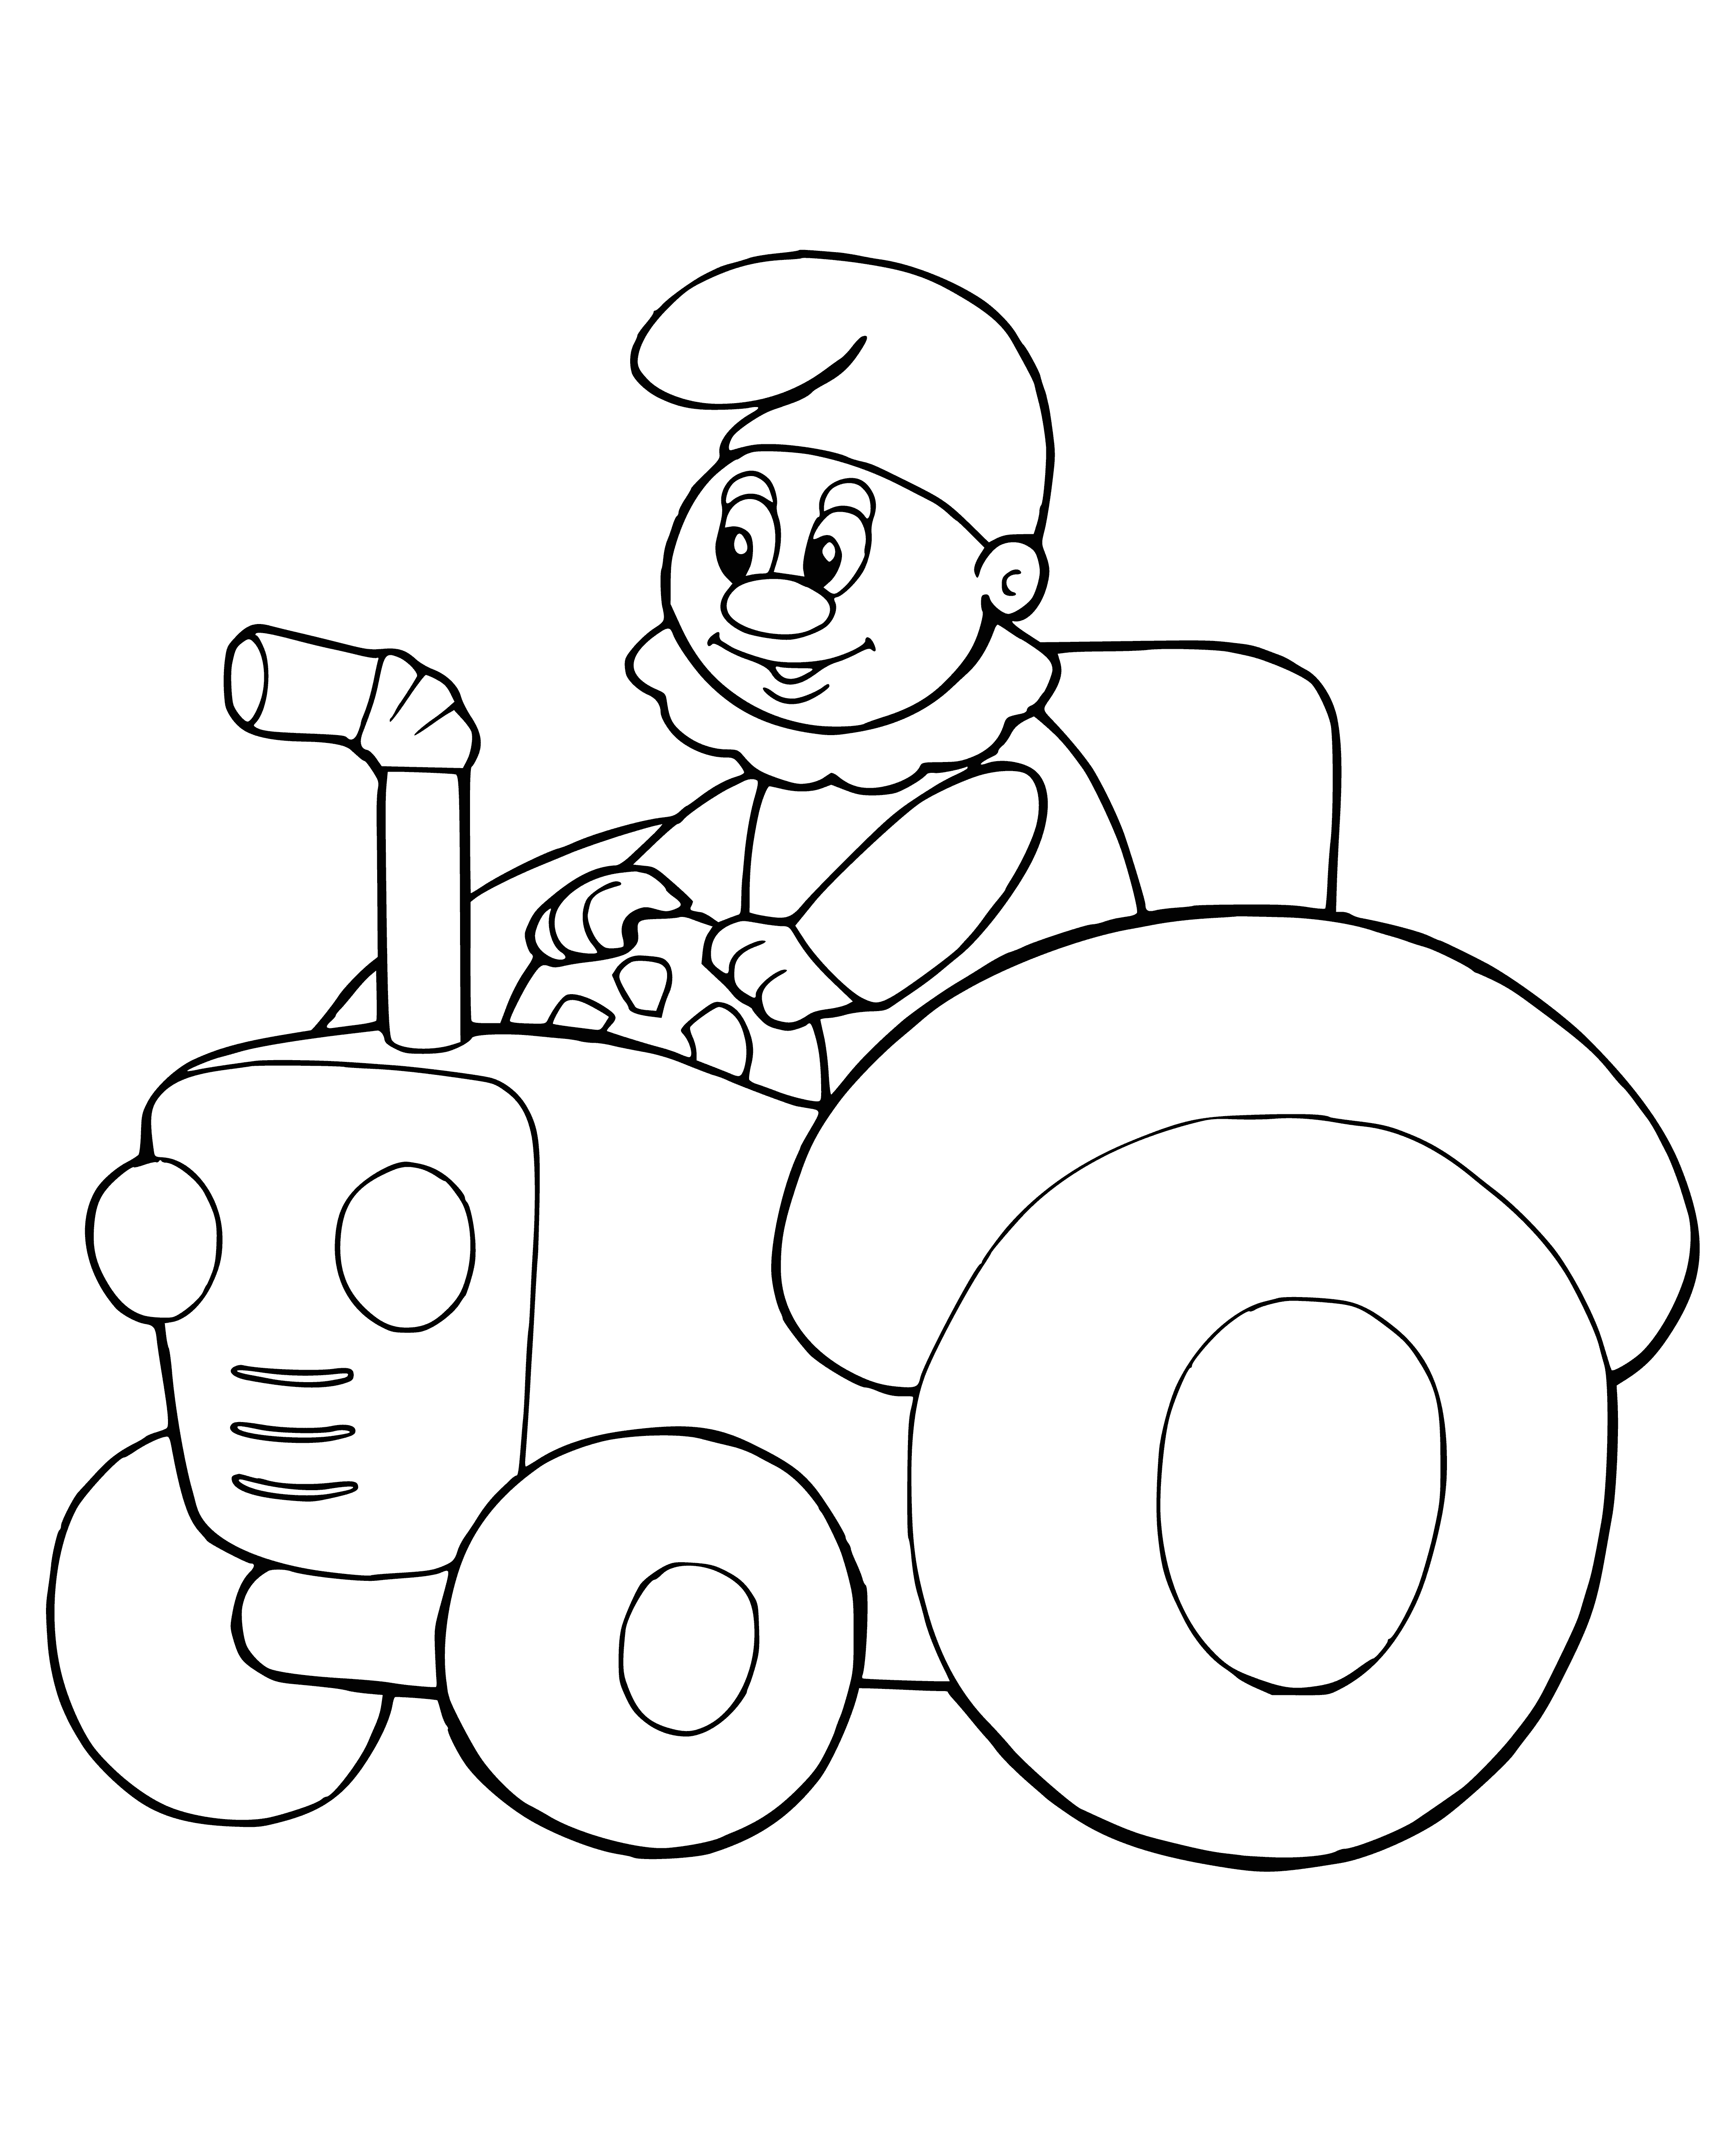 Toy tractor coloring page